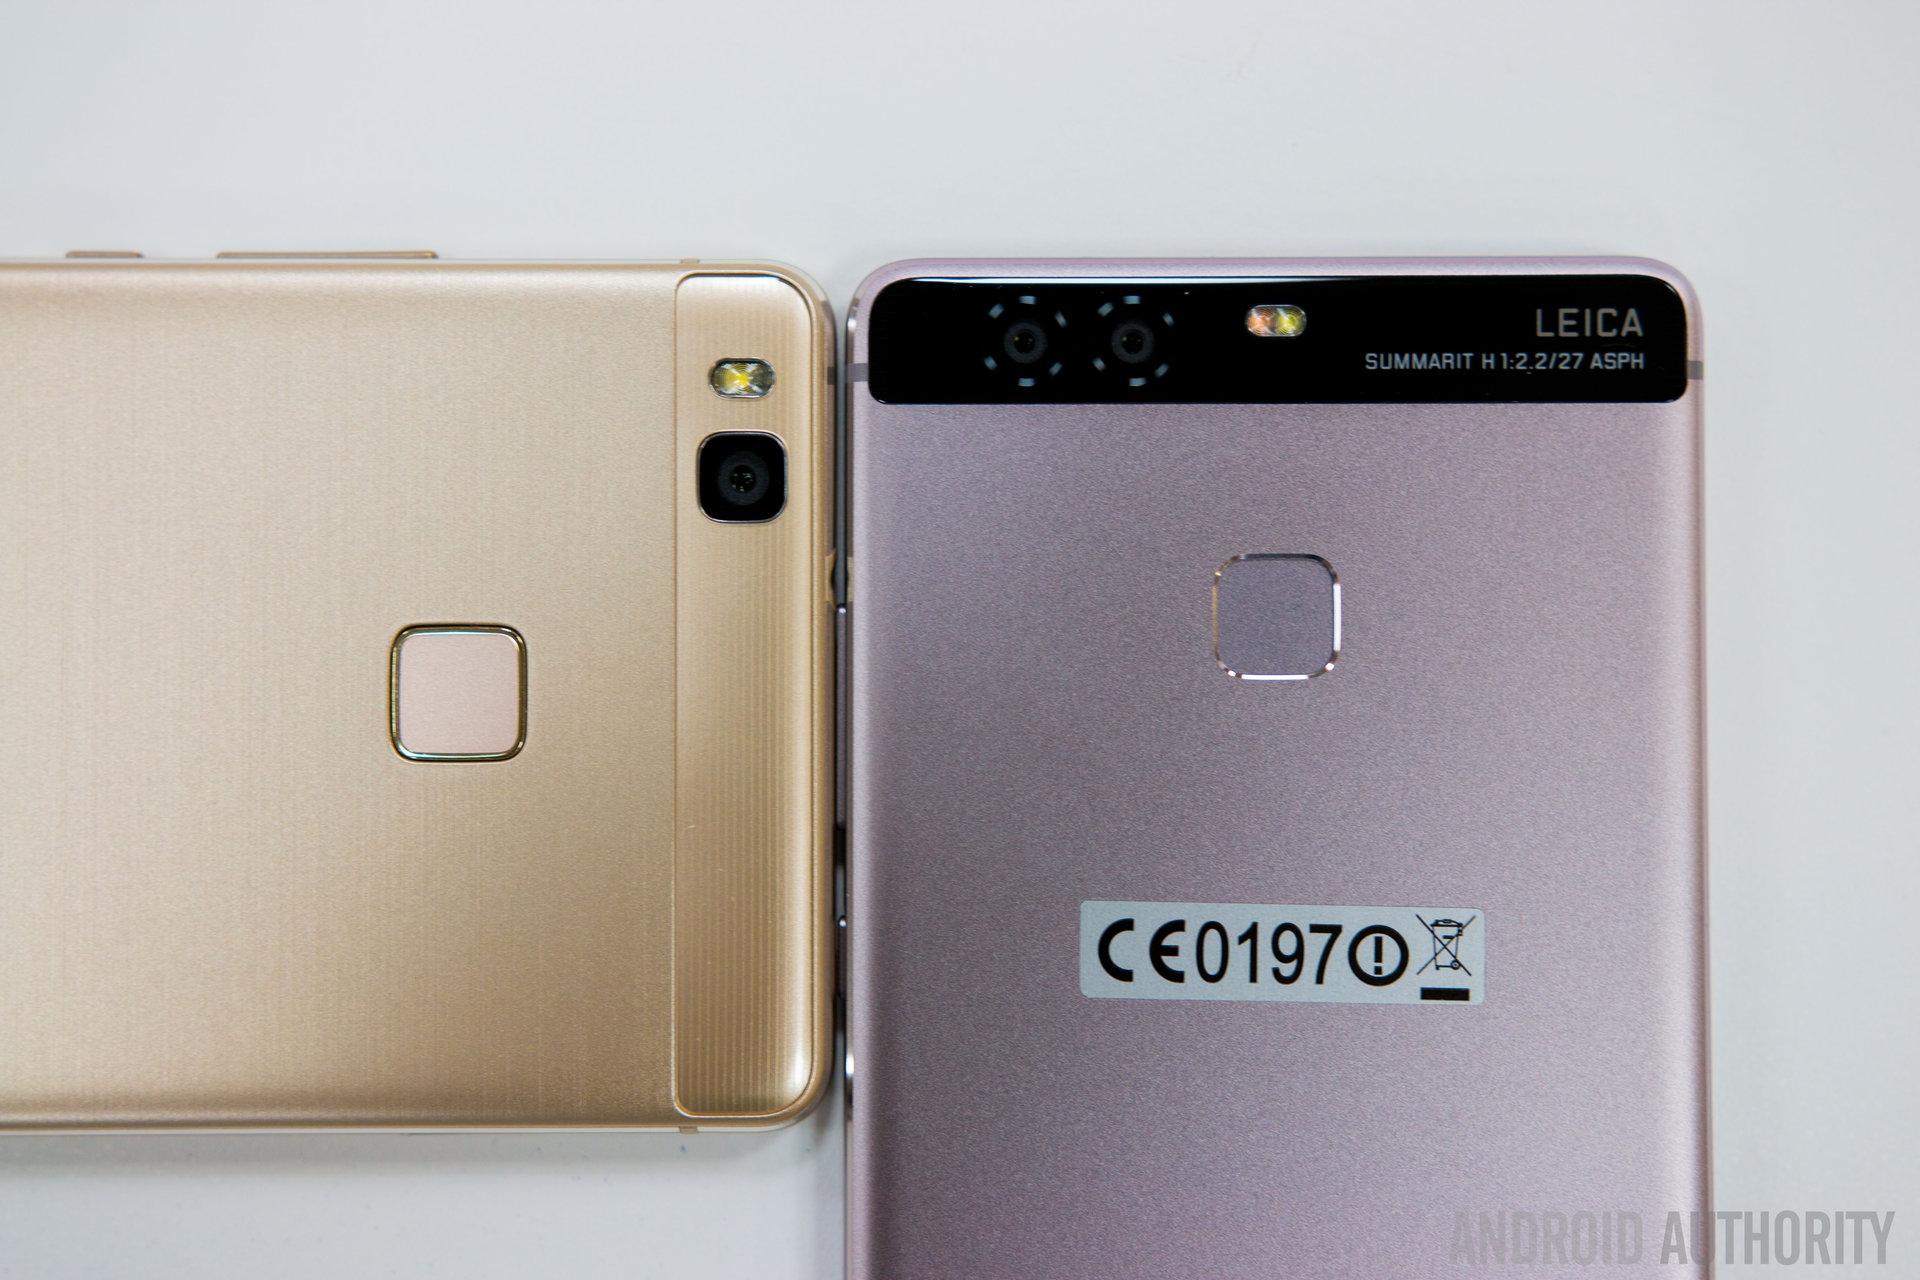 HUAWEI P9 Lite vs HUAWEI P9 quick look Android Authority